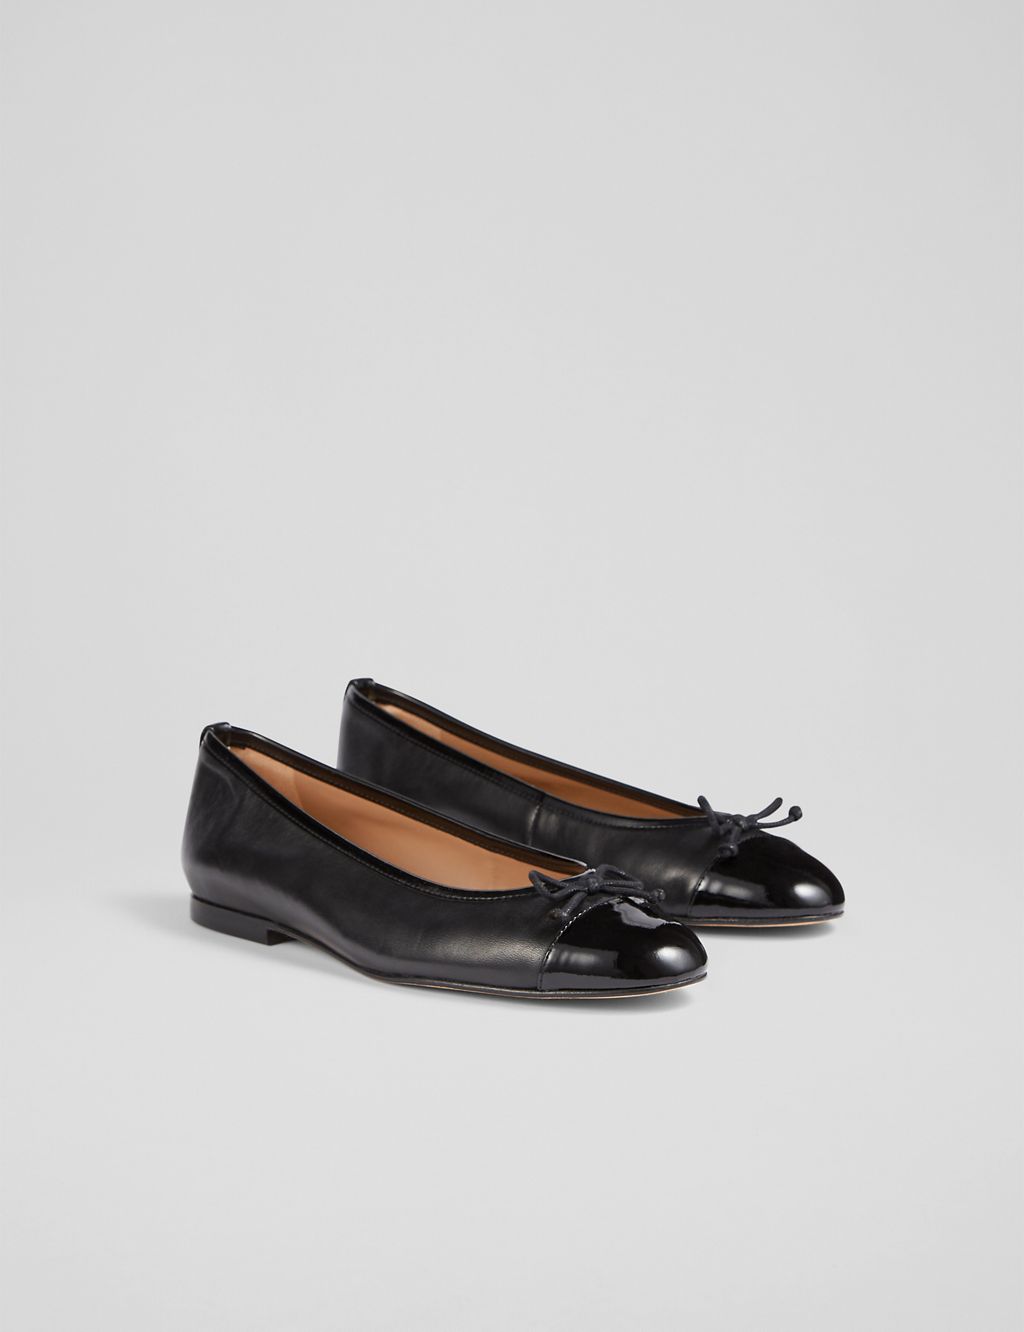 Leather Bow Flat Ballet Pumps 2 of 3